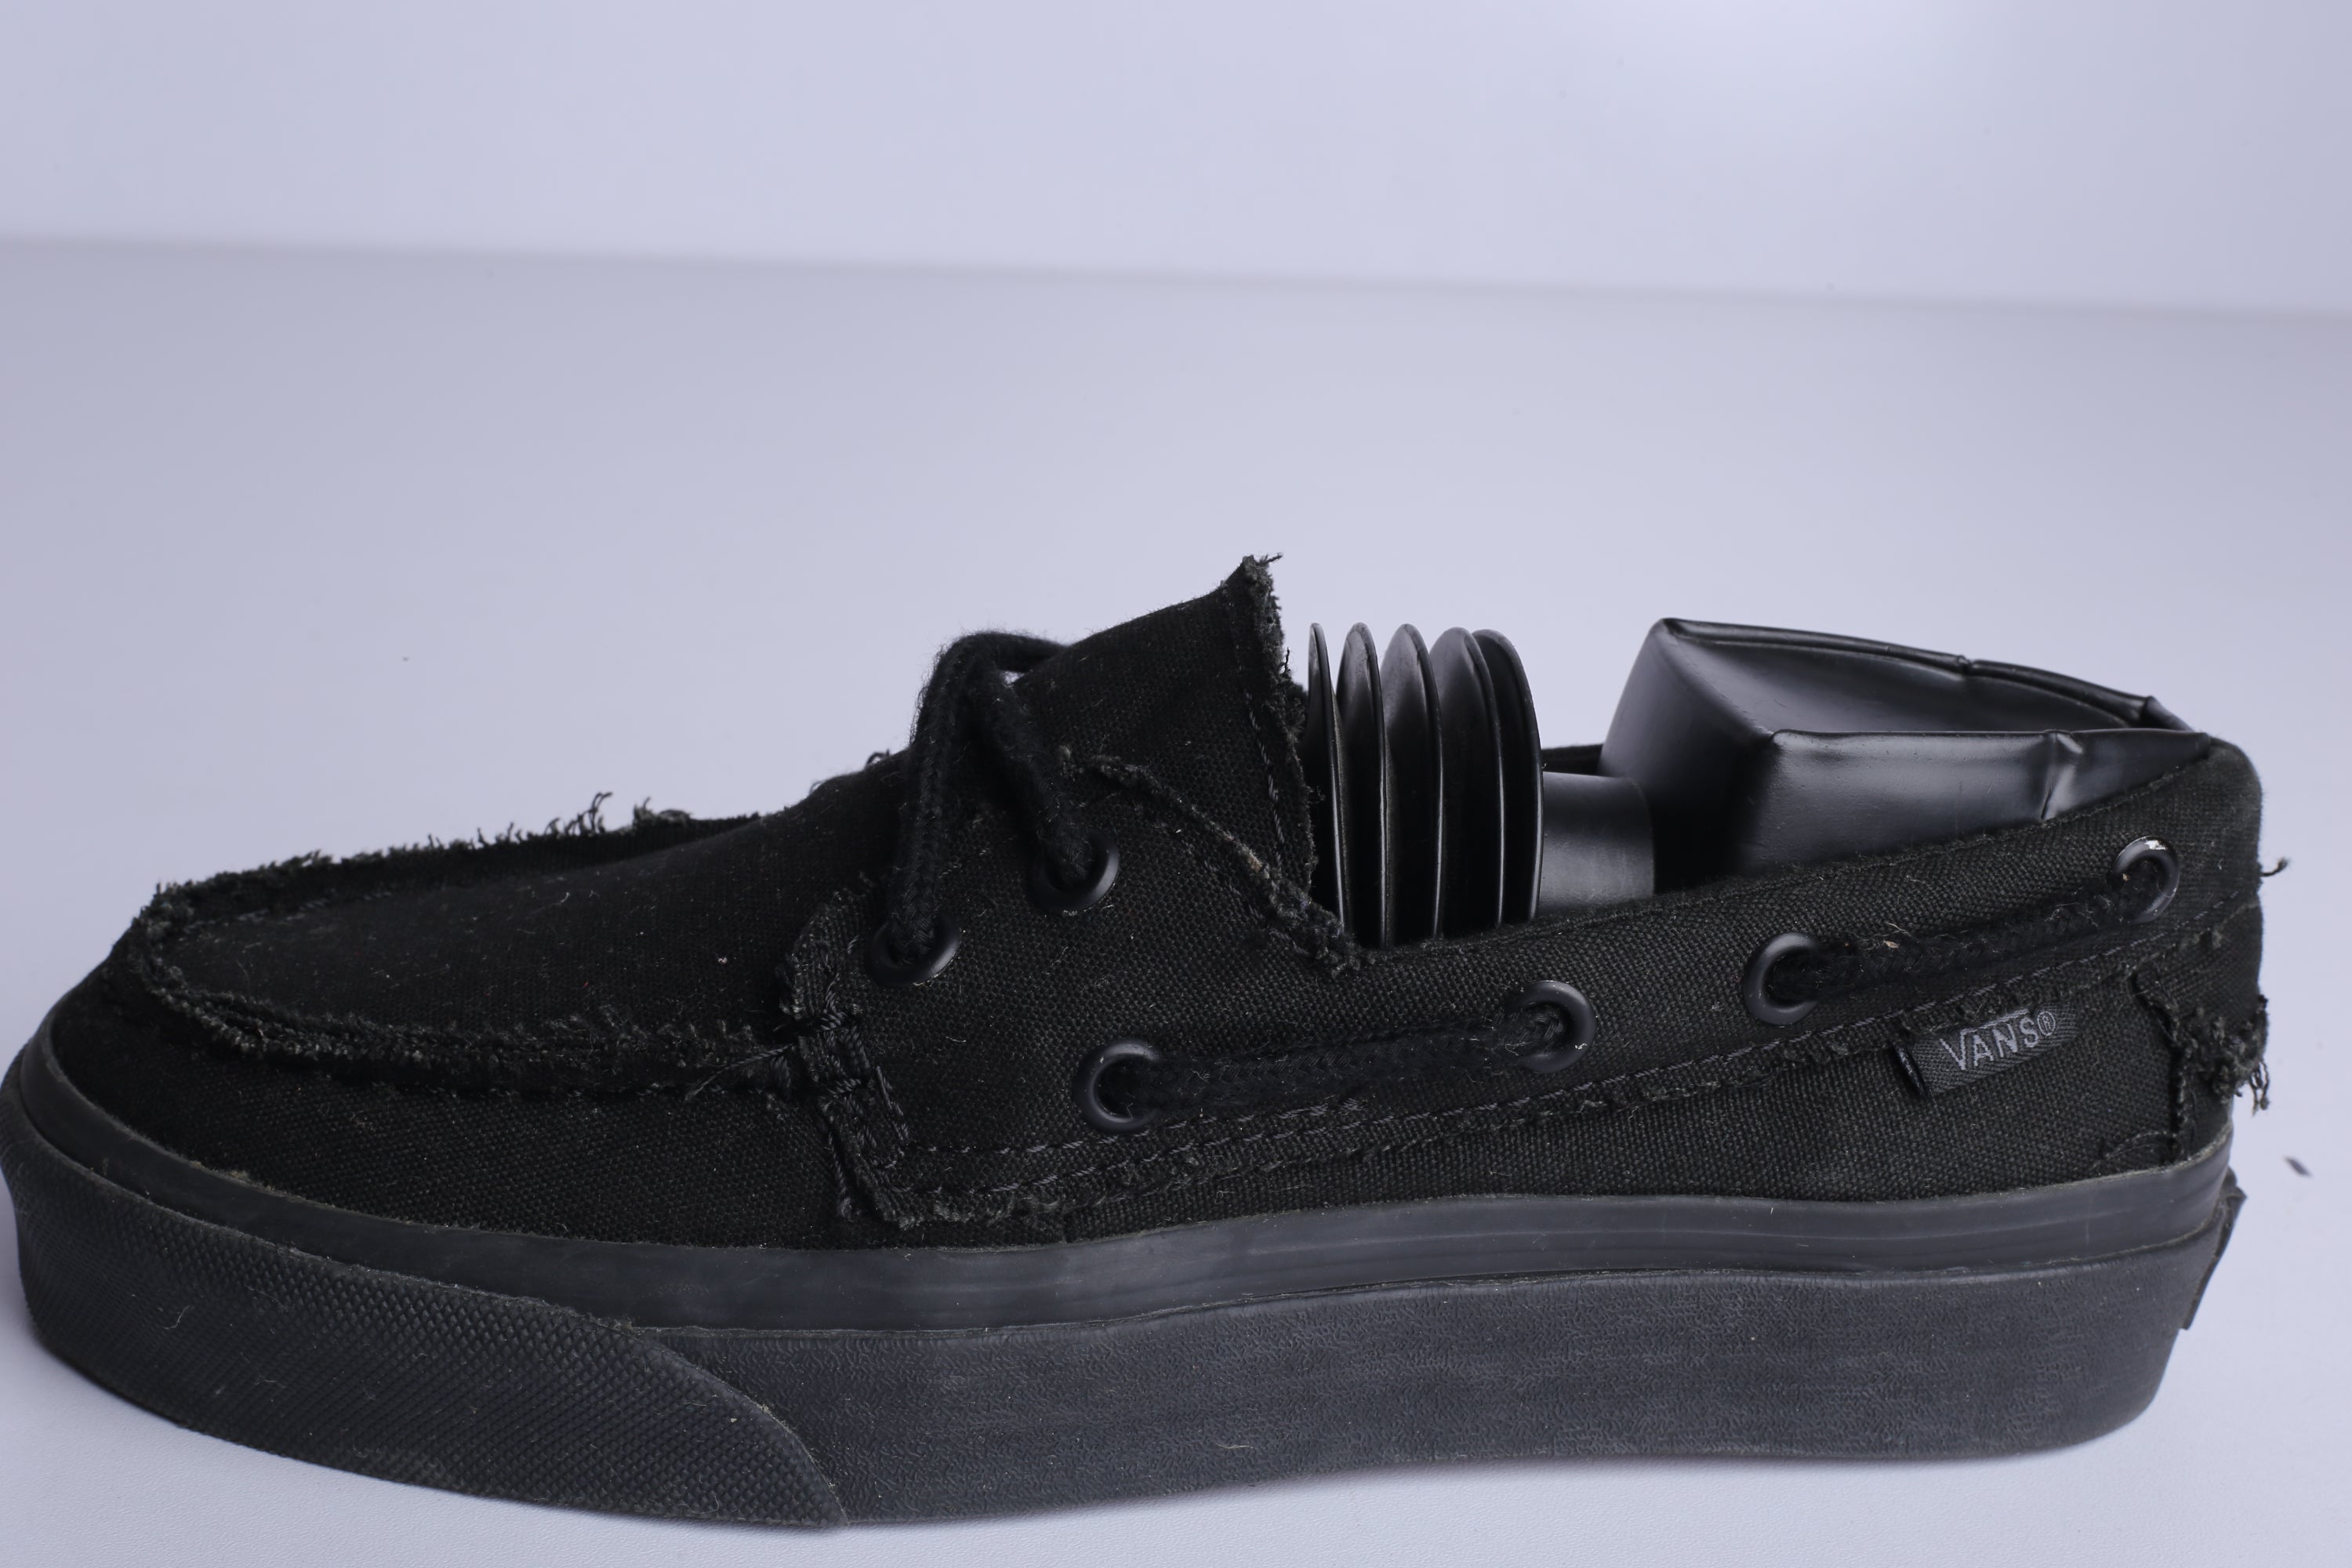 Vans Off the Wall Boat Sneaker Black - (Condition Premium)